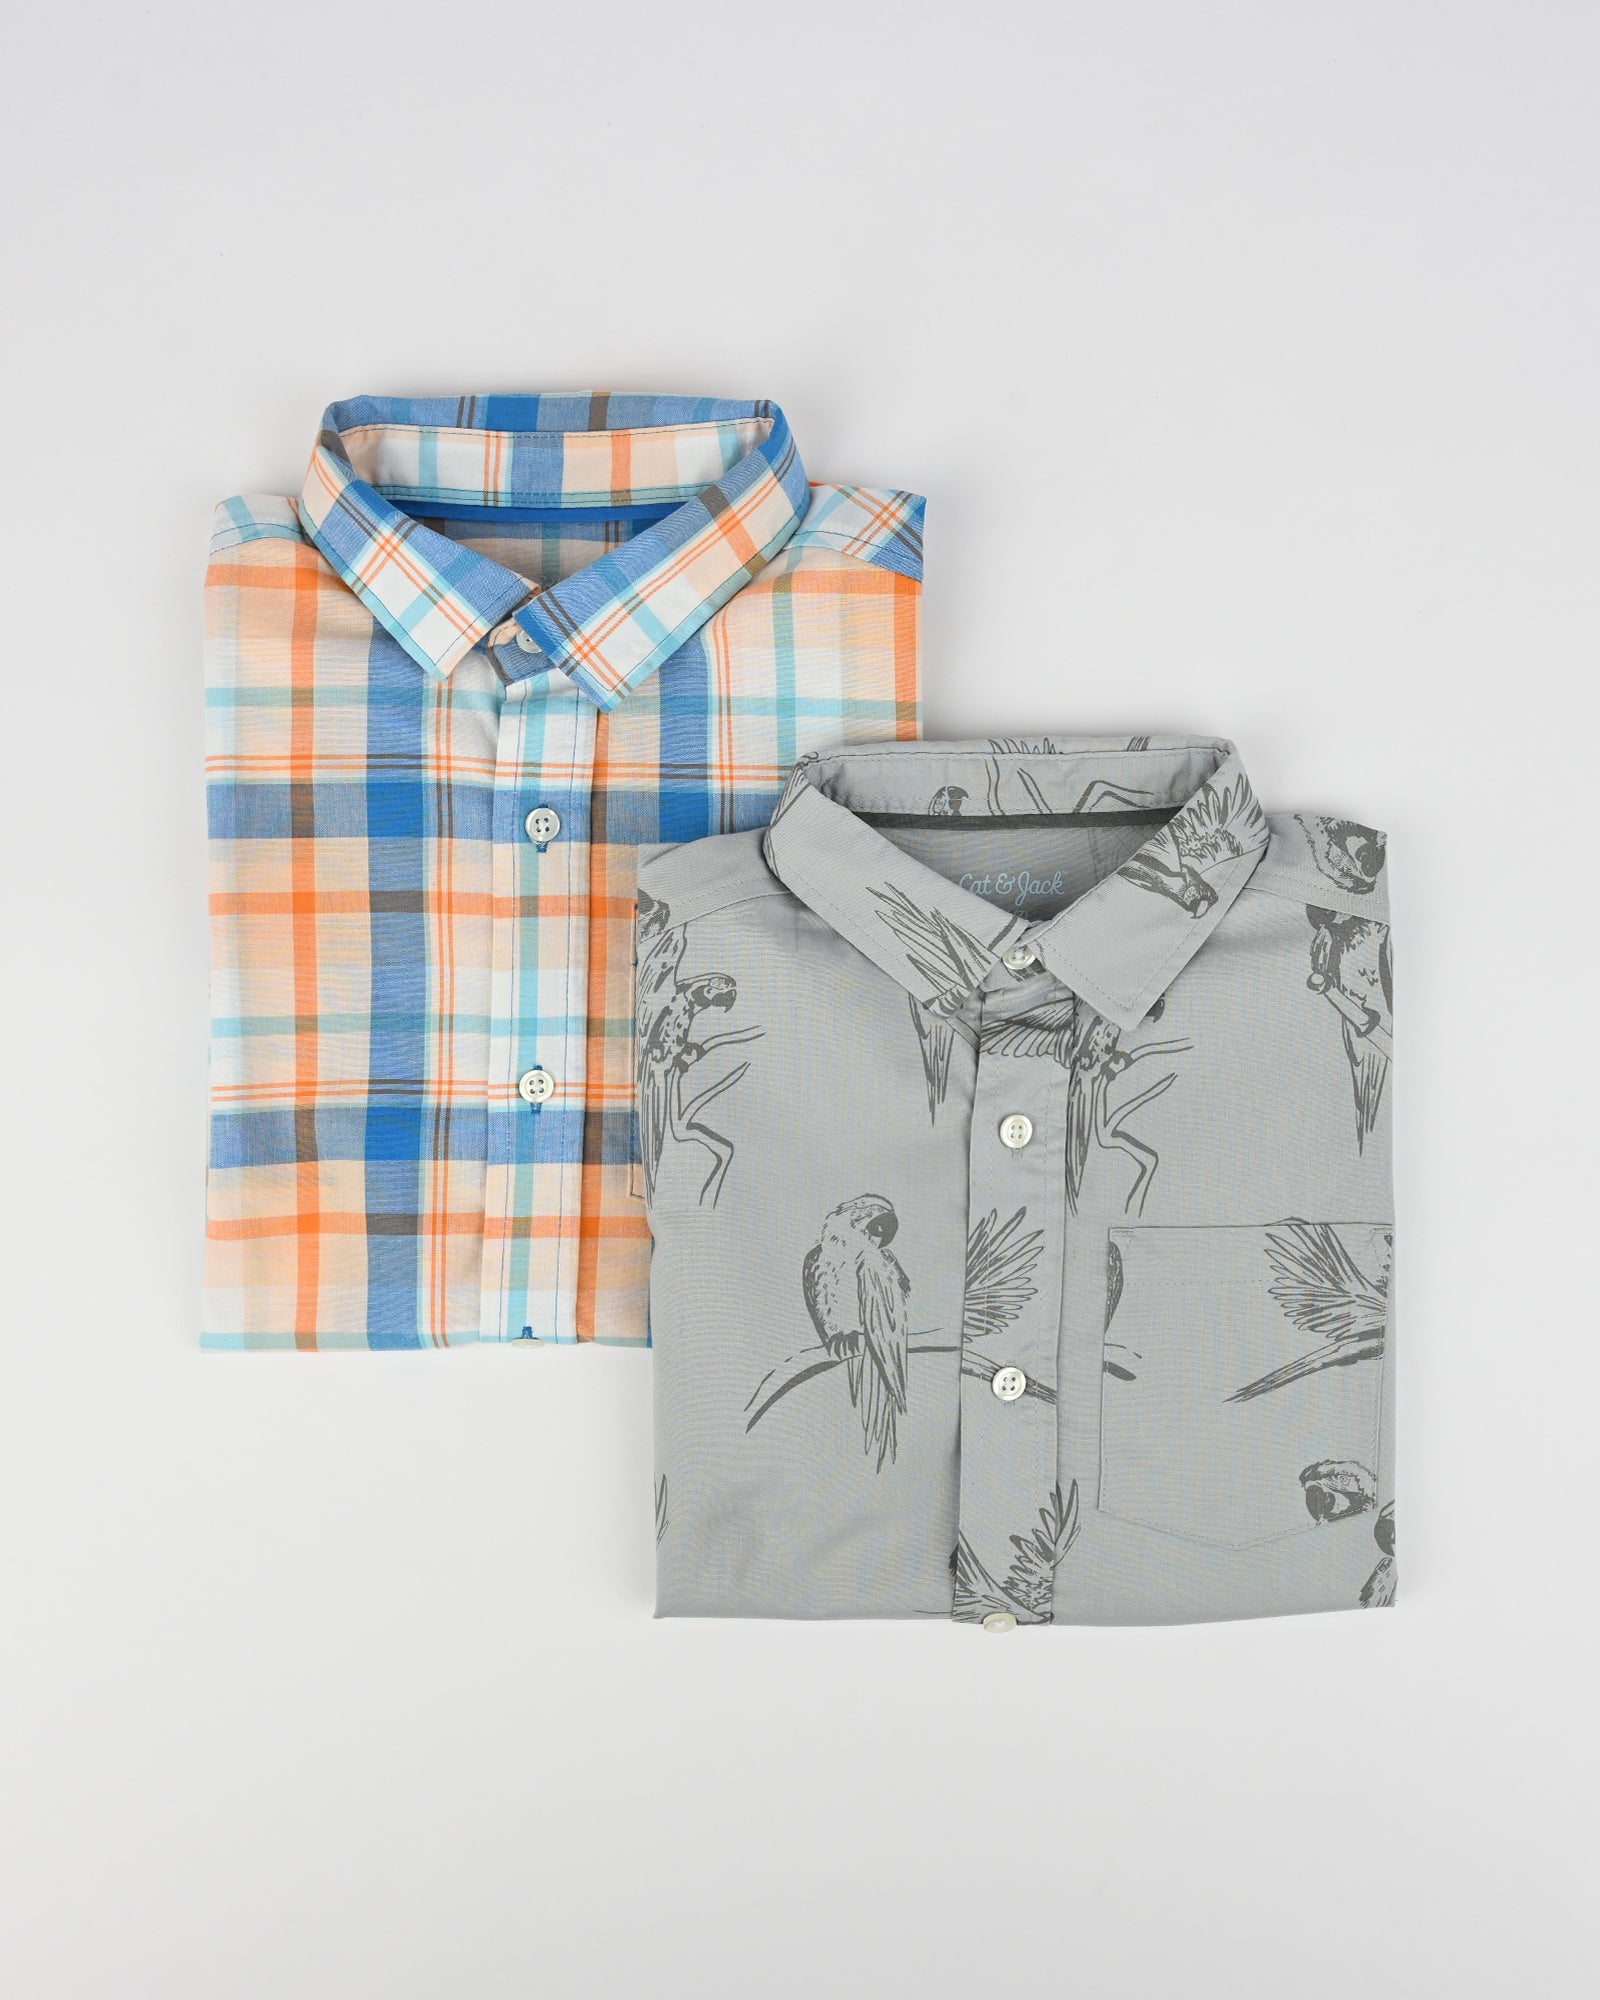 Boys Printed Half Sleeve Shirt: Stylish and Versatile for Every Occasion